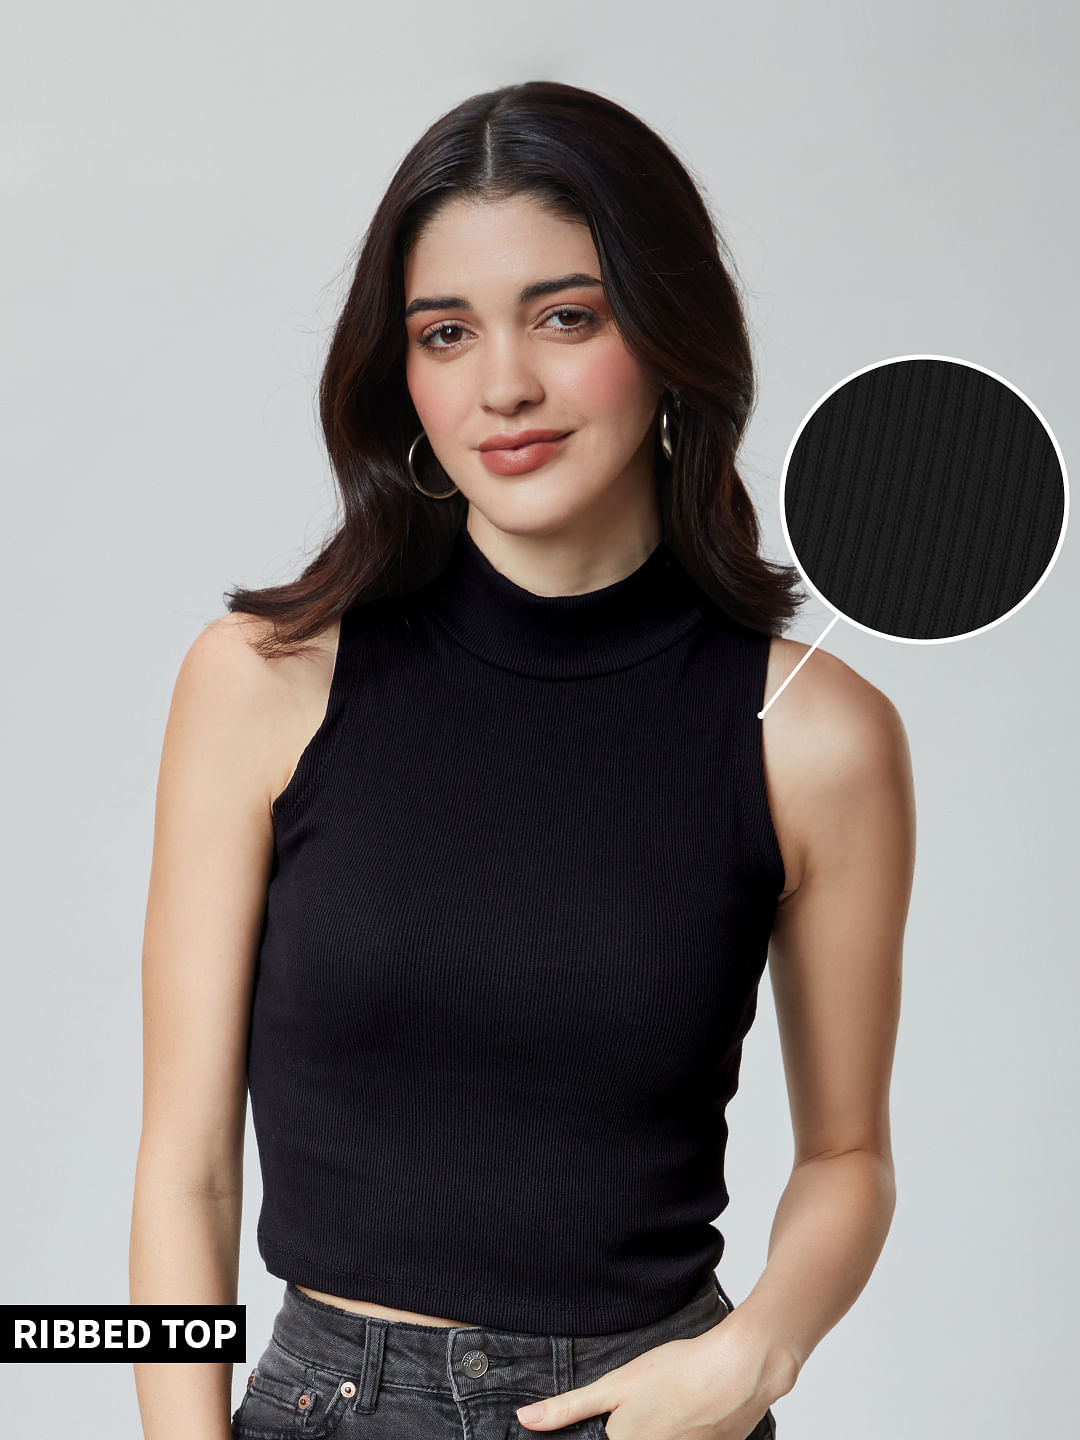 Buy Solids: Black Women's Cropped Tops online at The Souled Store